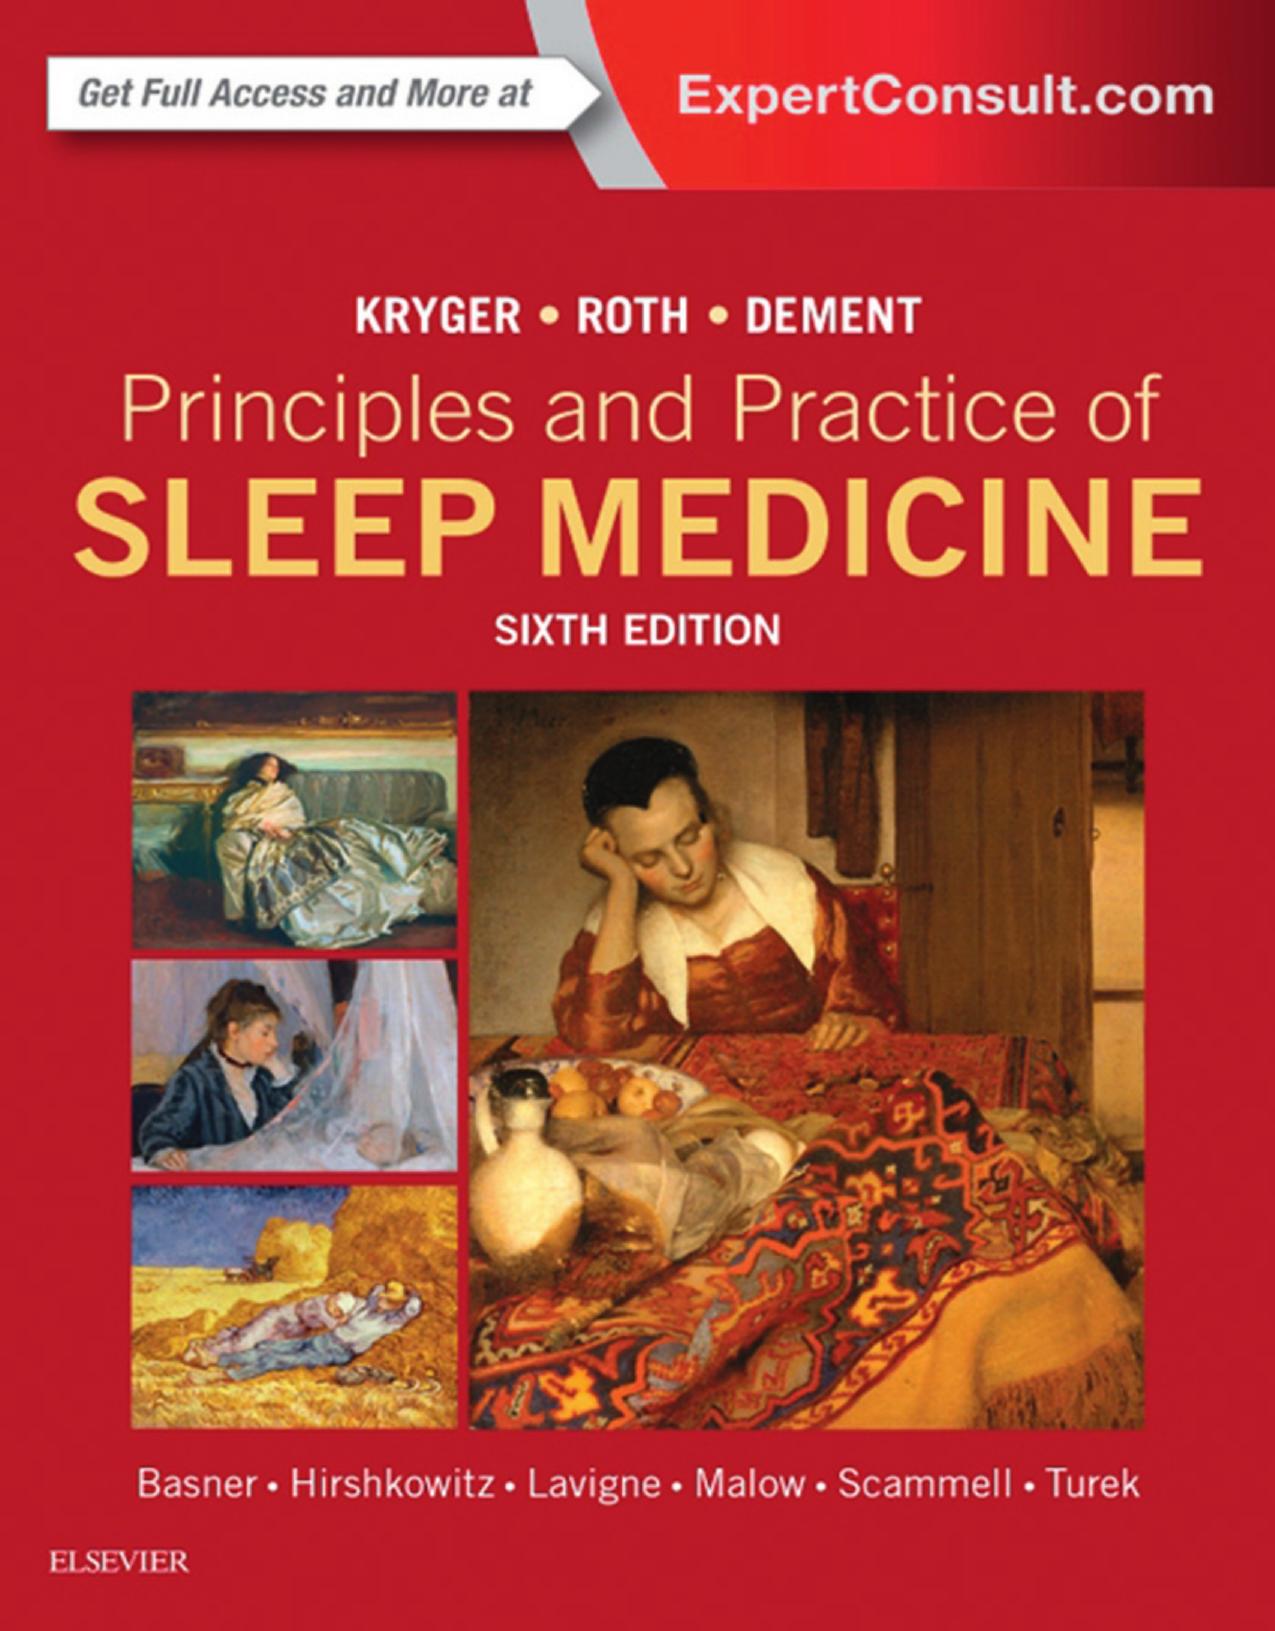 Principles and Practice of Sleep Medicine by Meir Kryger MD FRCPC & Thomas Roth PhD & William C. Dement MD PhD